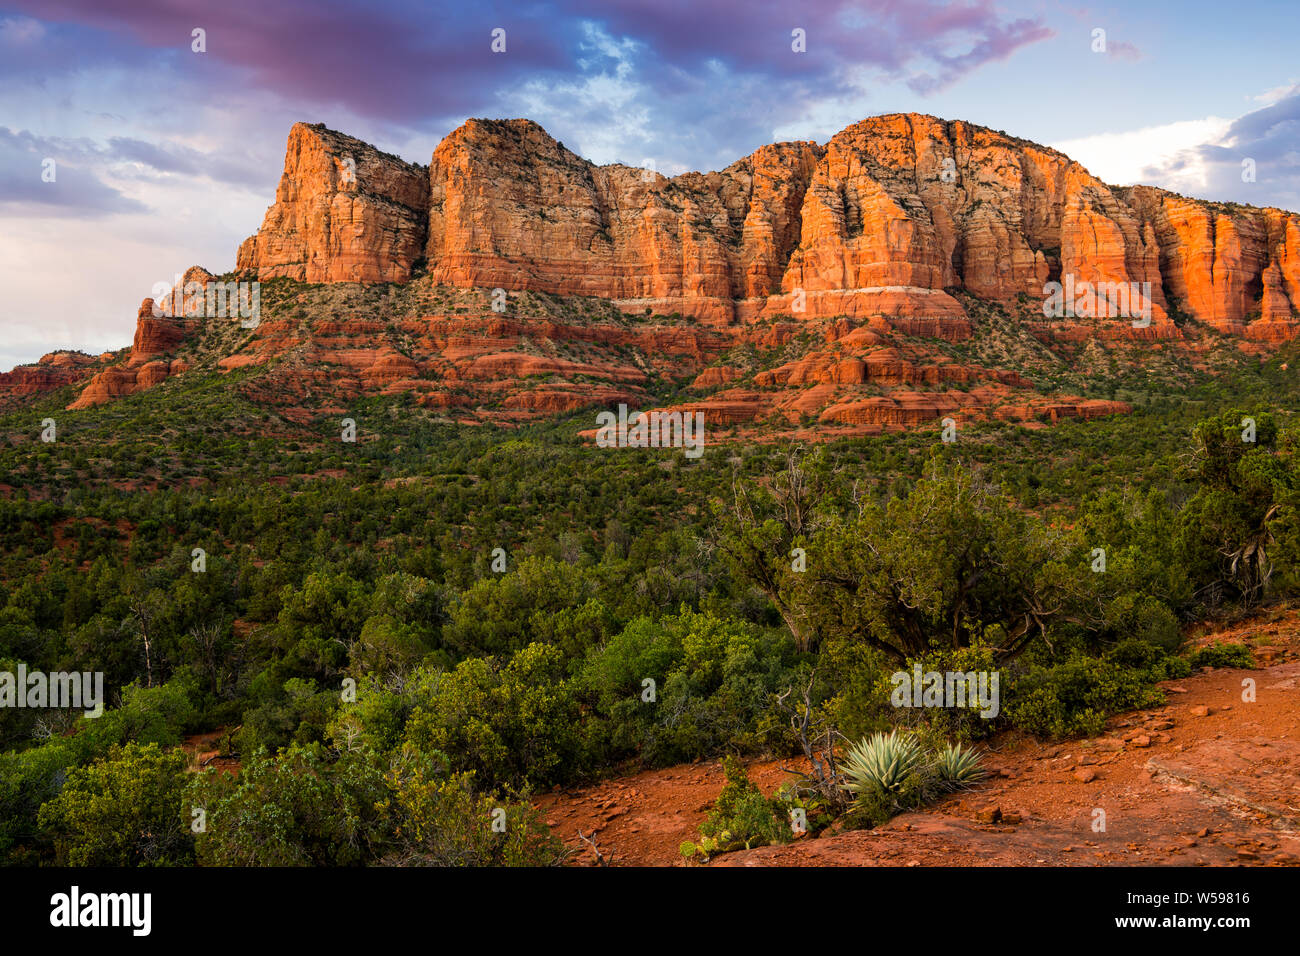 Beautiful red rock formation illuminated by sunset above a contrasting landscape of green juniper and shrubs under a colorful sky - Sedona, Arizona Stock Photo